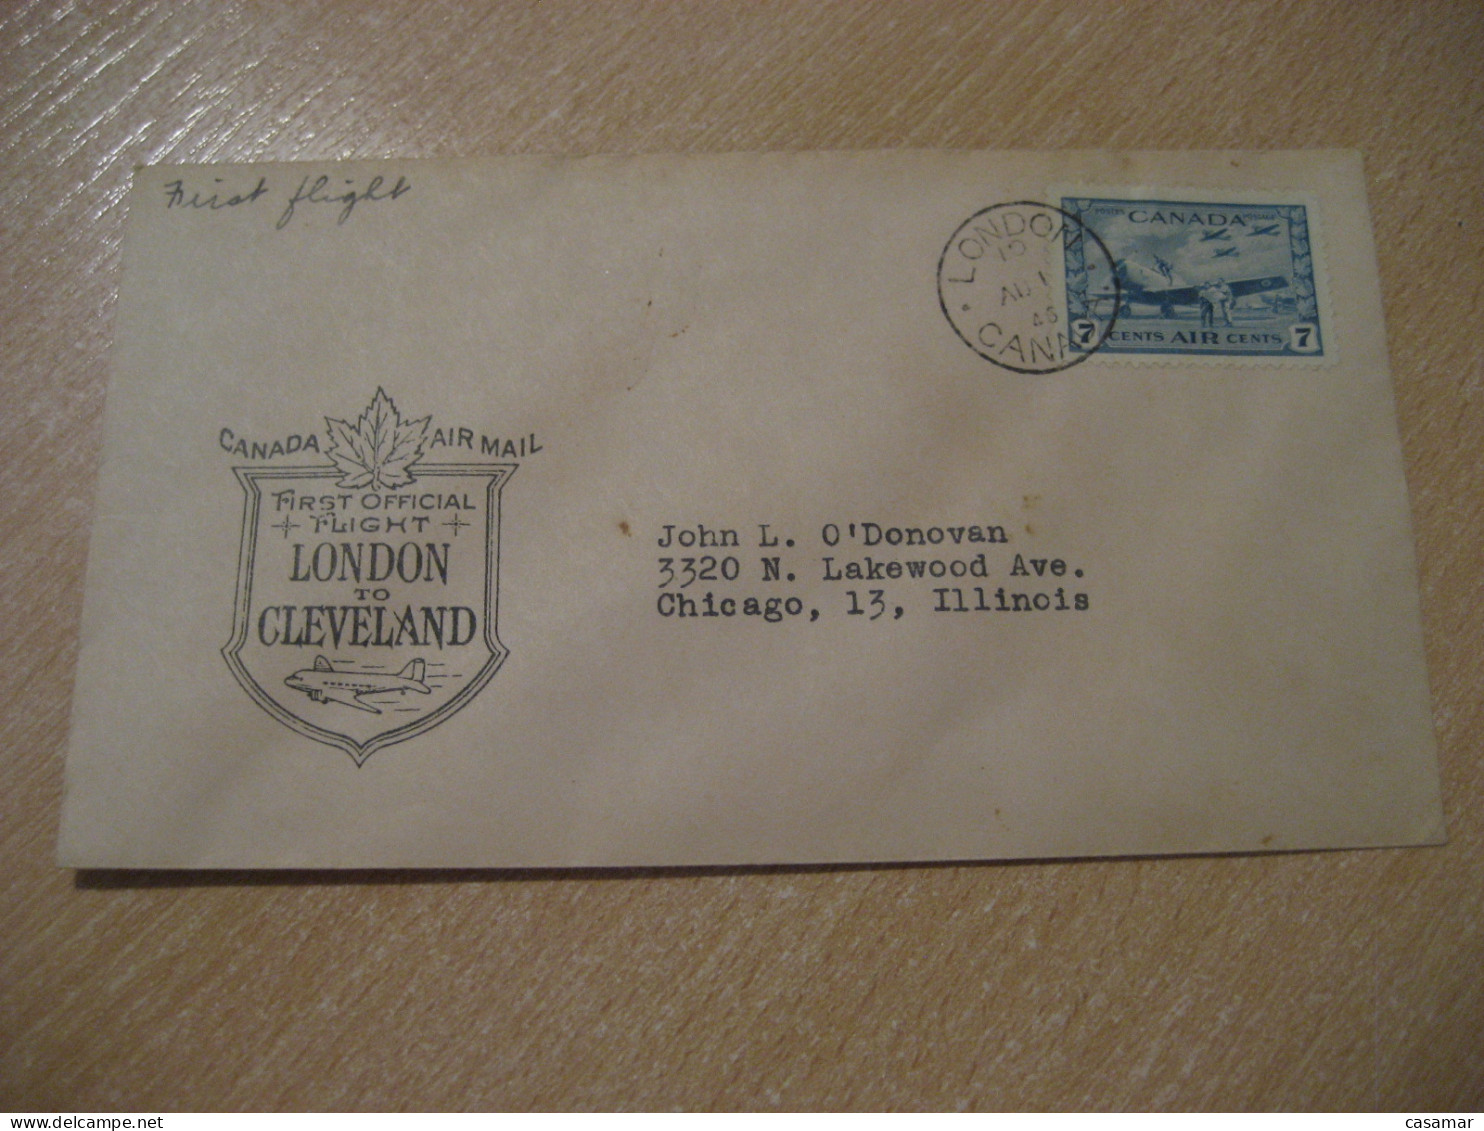 LONDON To CLEVELAND 1946 First Official Flight Air Mail Field Cancel Cover CANADA England - Primeros Vuelos